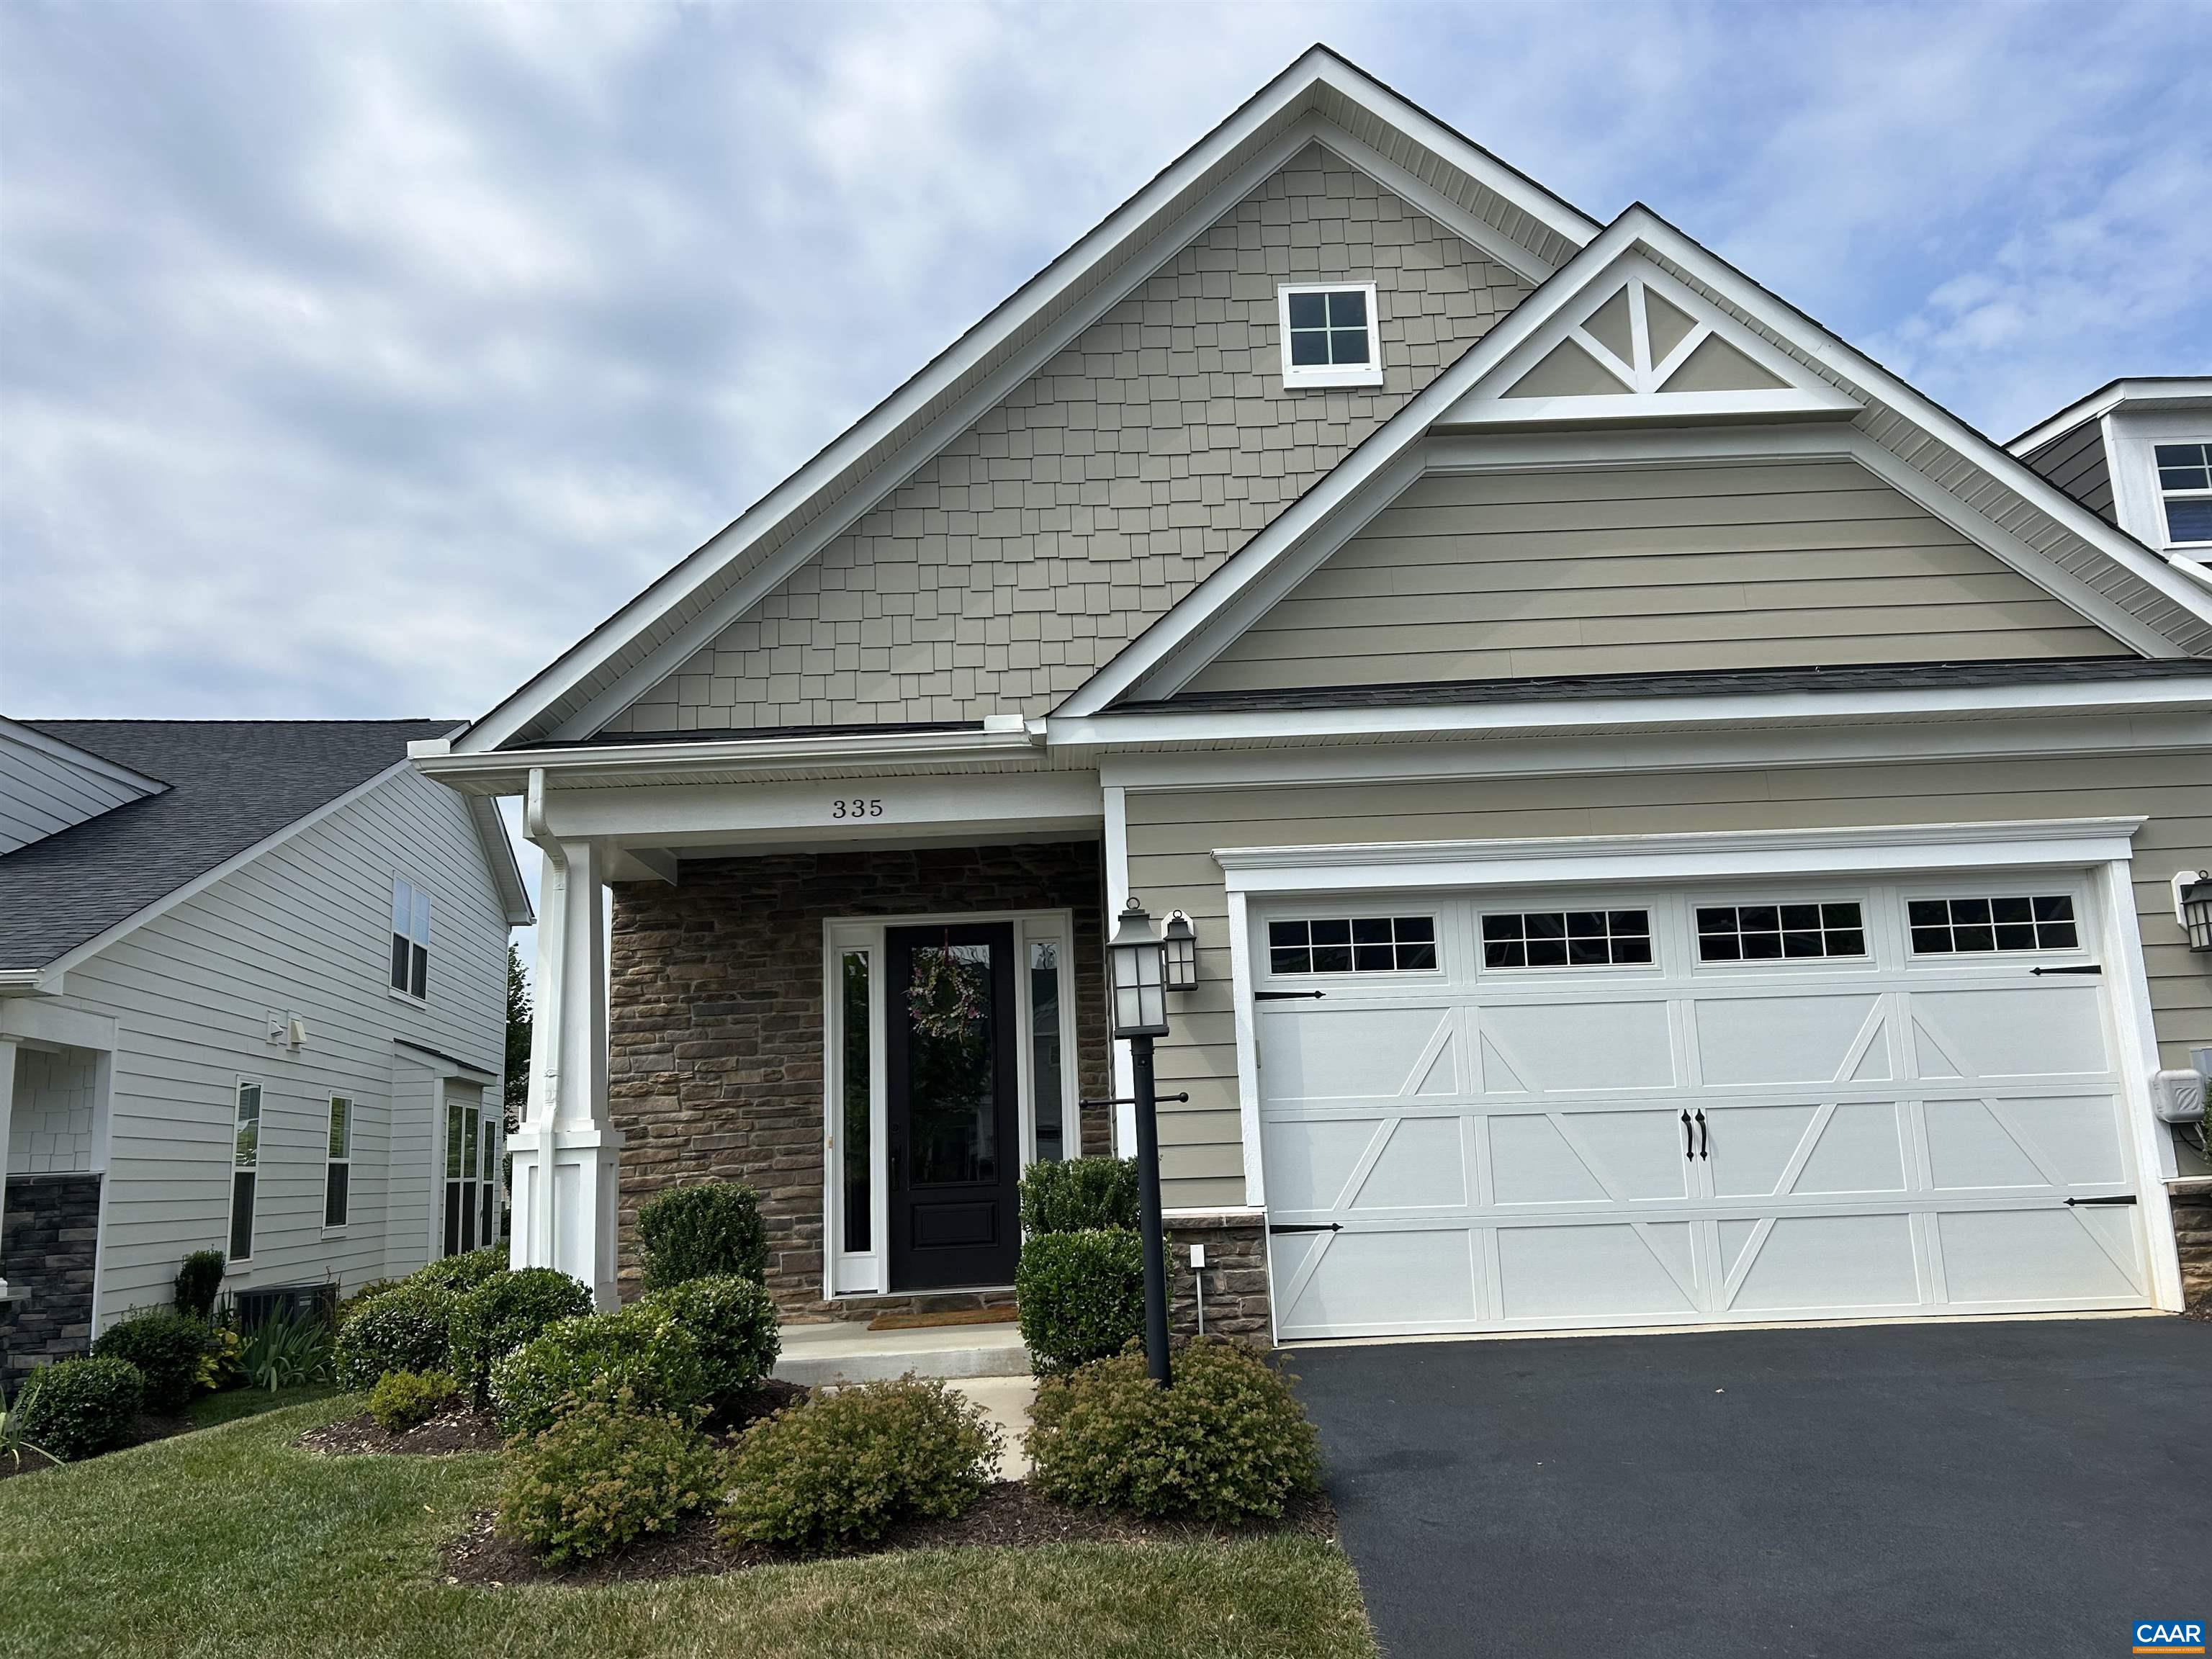 335 CLAIBOURNE RD, CROZET, Virginia 22932, 3 Bedrooms Bedrooms, ,2 BathroomsBathrooms,Residential,Beautiful attached upgraded home in Glenbrook at F,335 CLAIBOURNE RD,655184 MLS # 655184